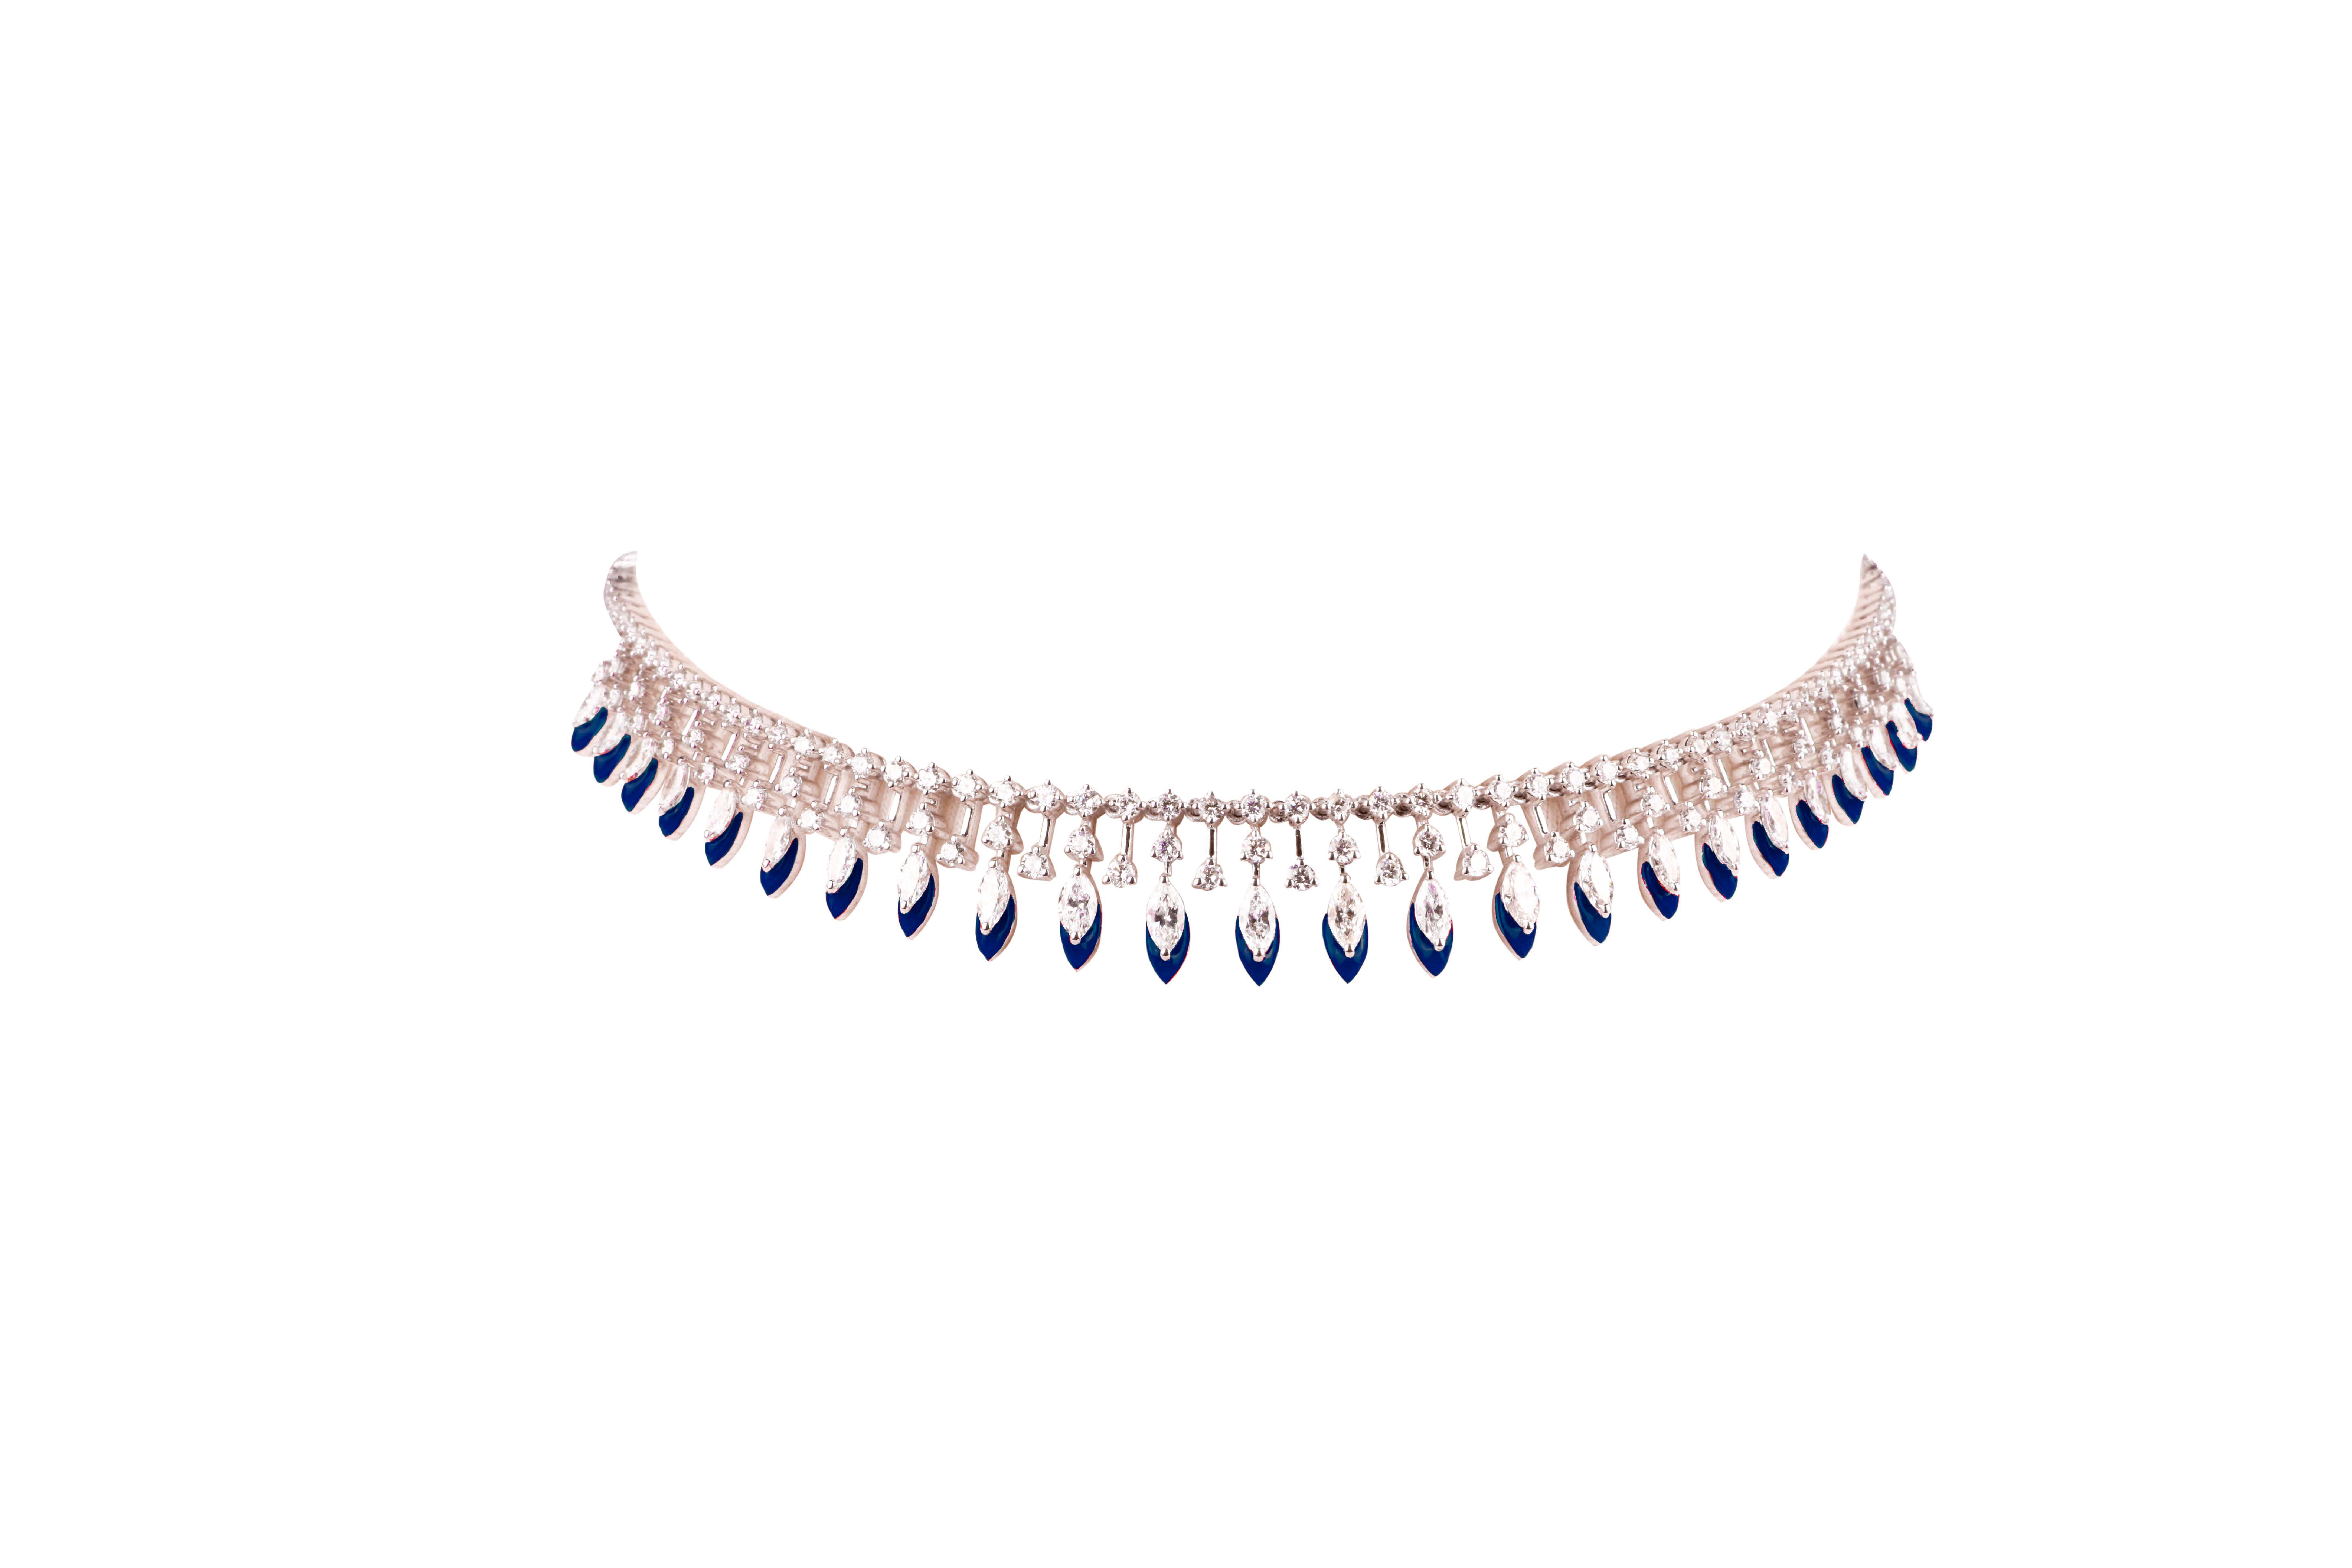 5.96 Carat Marquise and Rounds Enamel Choker, Graduating marquise shape diamonds from 0.20 carats to 0.10 carats, in combination with 0.05 carat round diamonds. Black enamel is used to highlight the pear shapes. This choker is made in 22.93 grams